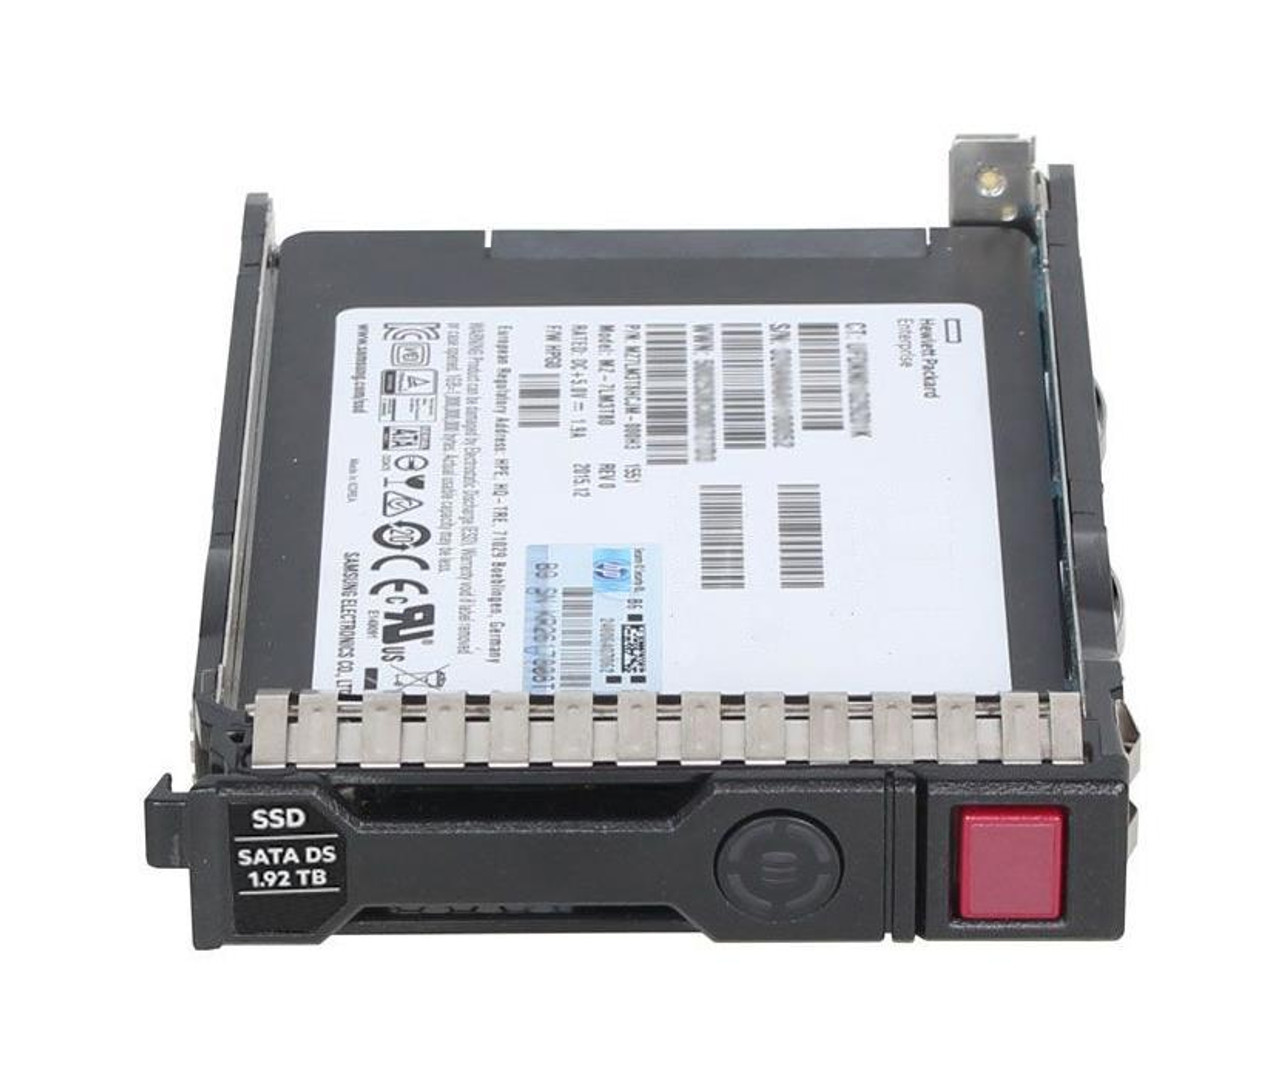 P06198-K21 HPE 1.92TB SATA 6Gbps Read Intensive 2.5-inch Internal Solid State Drive (SSD) with Smart Carrier